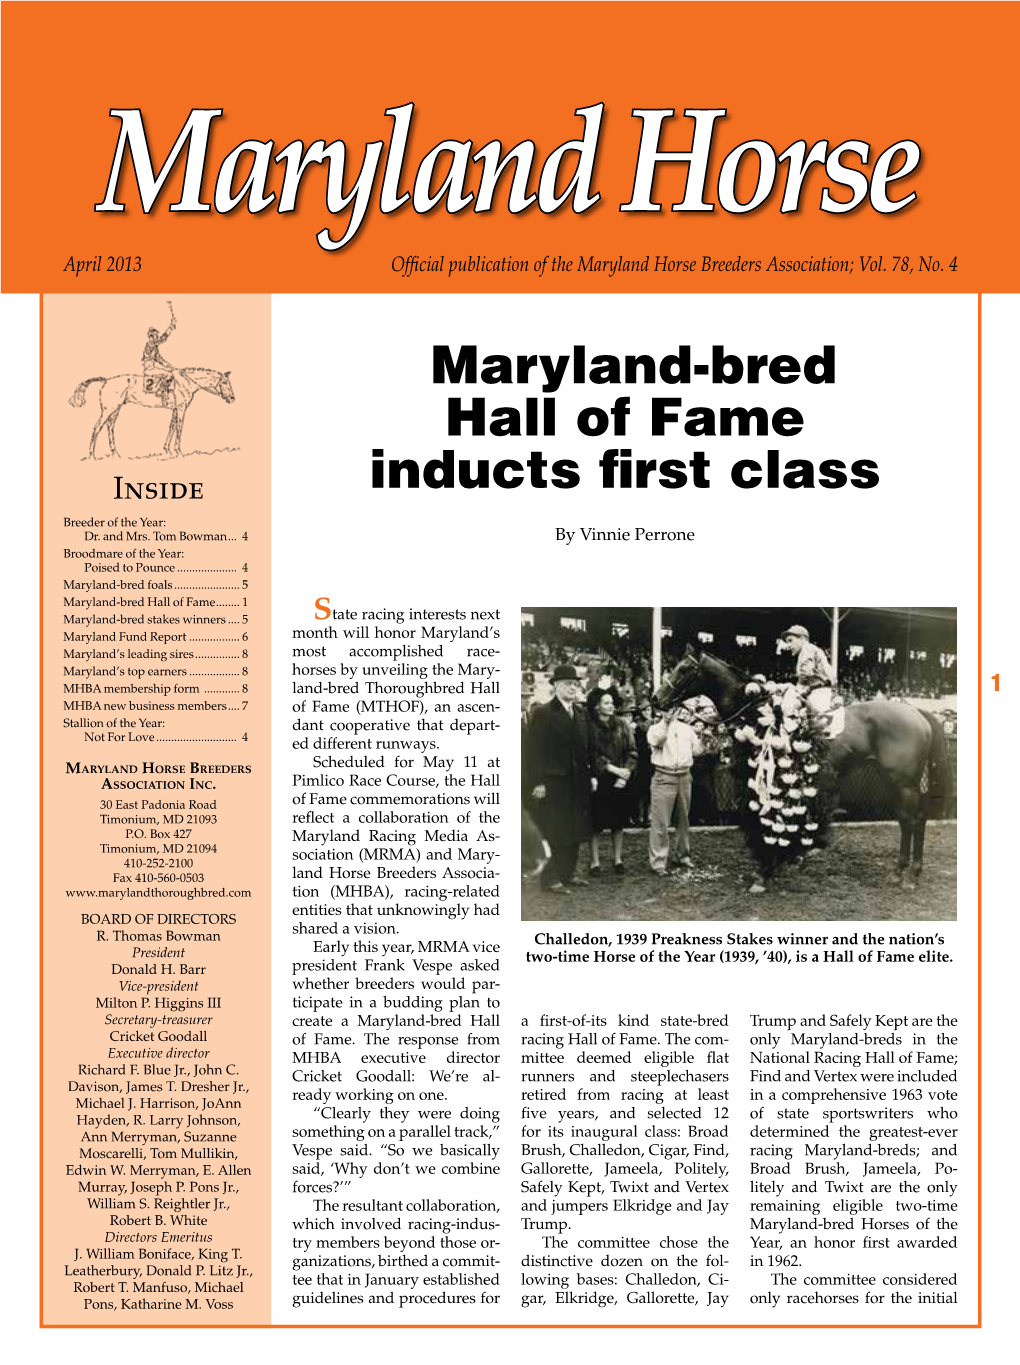 Maryland-Bred Hall of Fame Inducts First Class